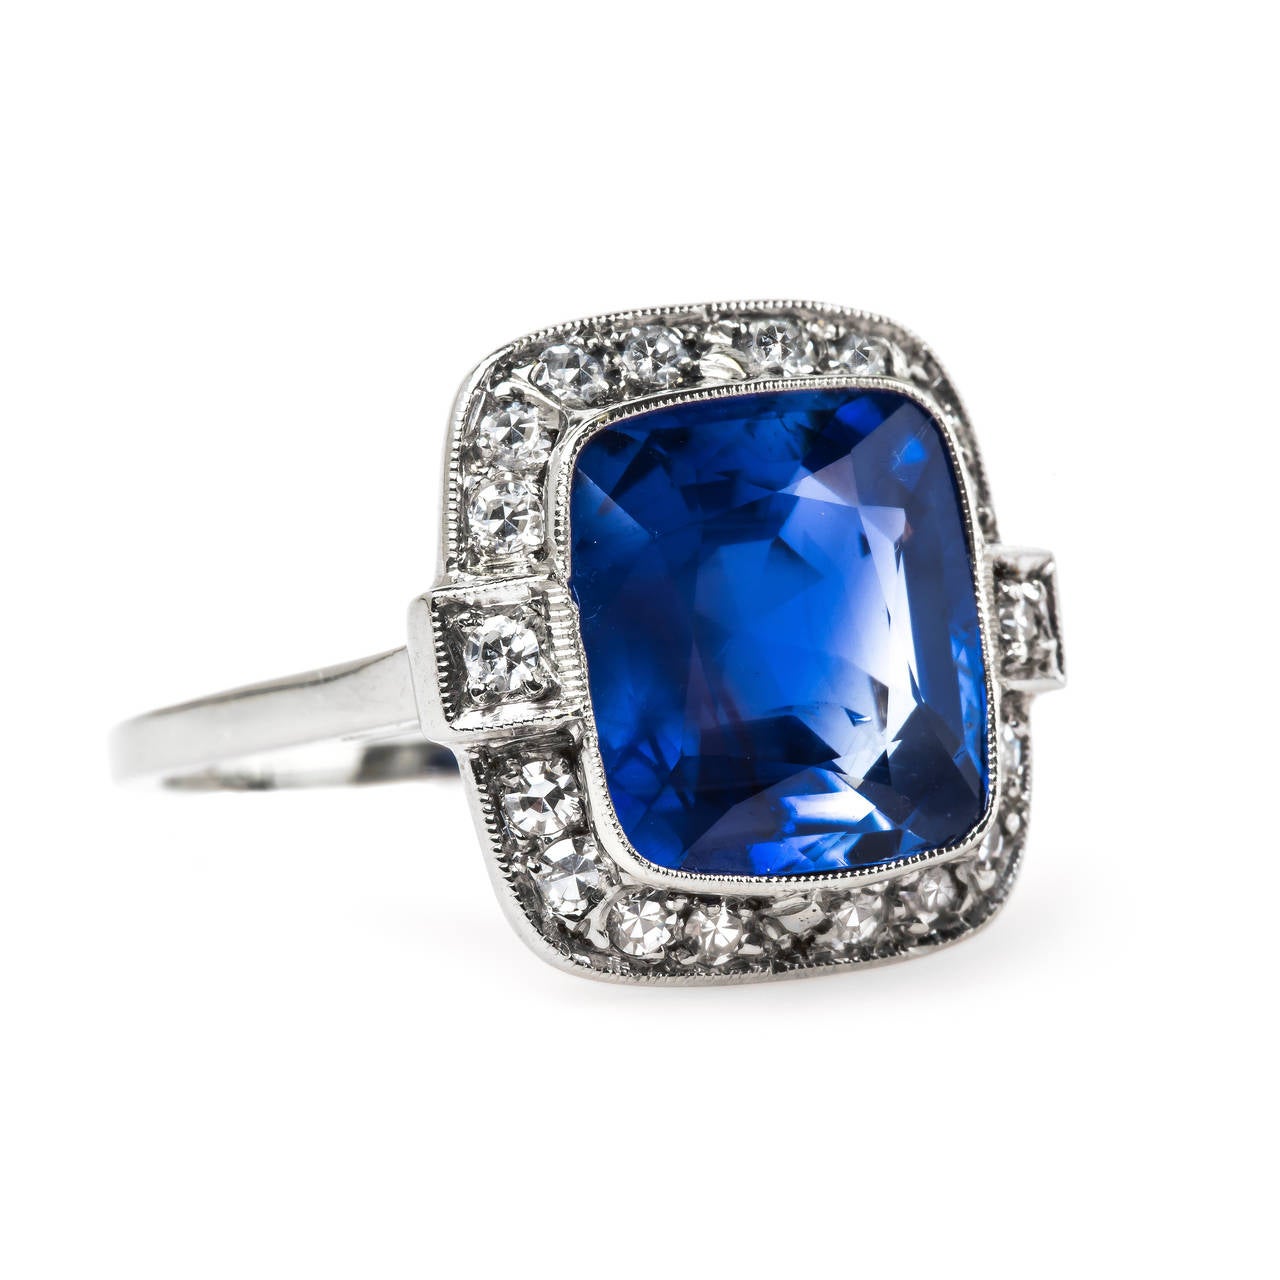 Lausanne is an incredible vintage Late Art Deco (circa 1935) 14k white gold engagement ring. This show-stopping ring centers a bezel set 6.82ct Cushion Cut sapphire accompanied with a GIA certificate stating the sapphire is unheated and from